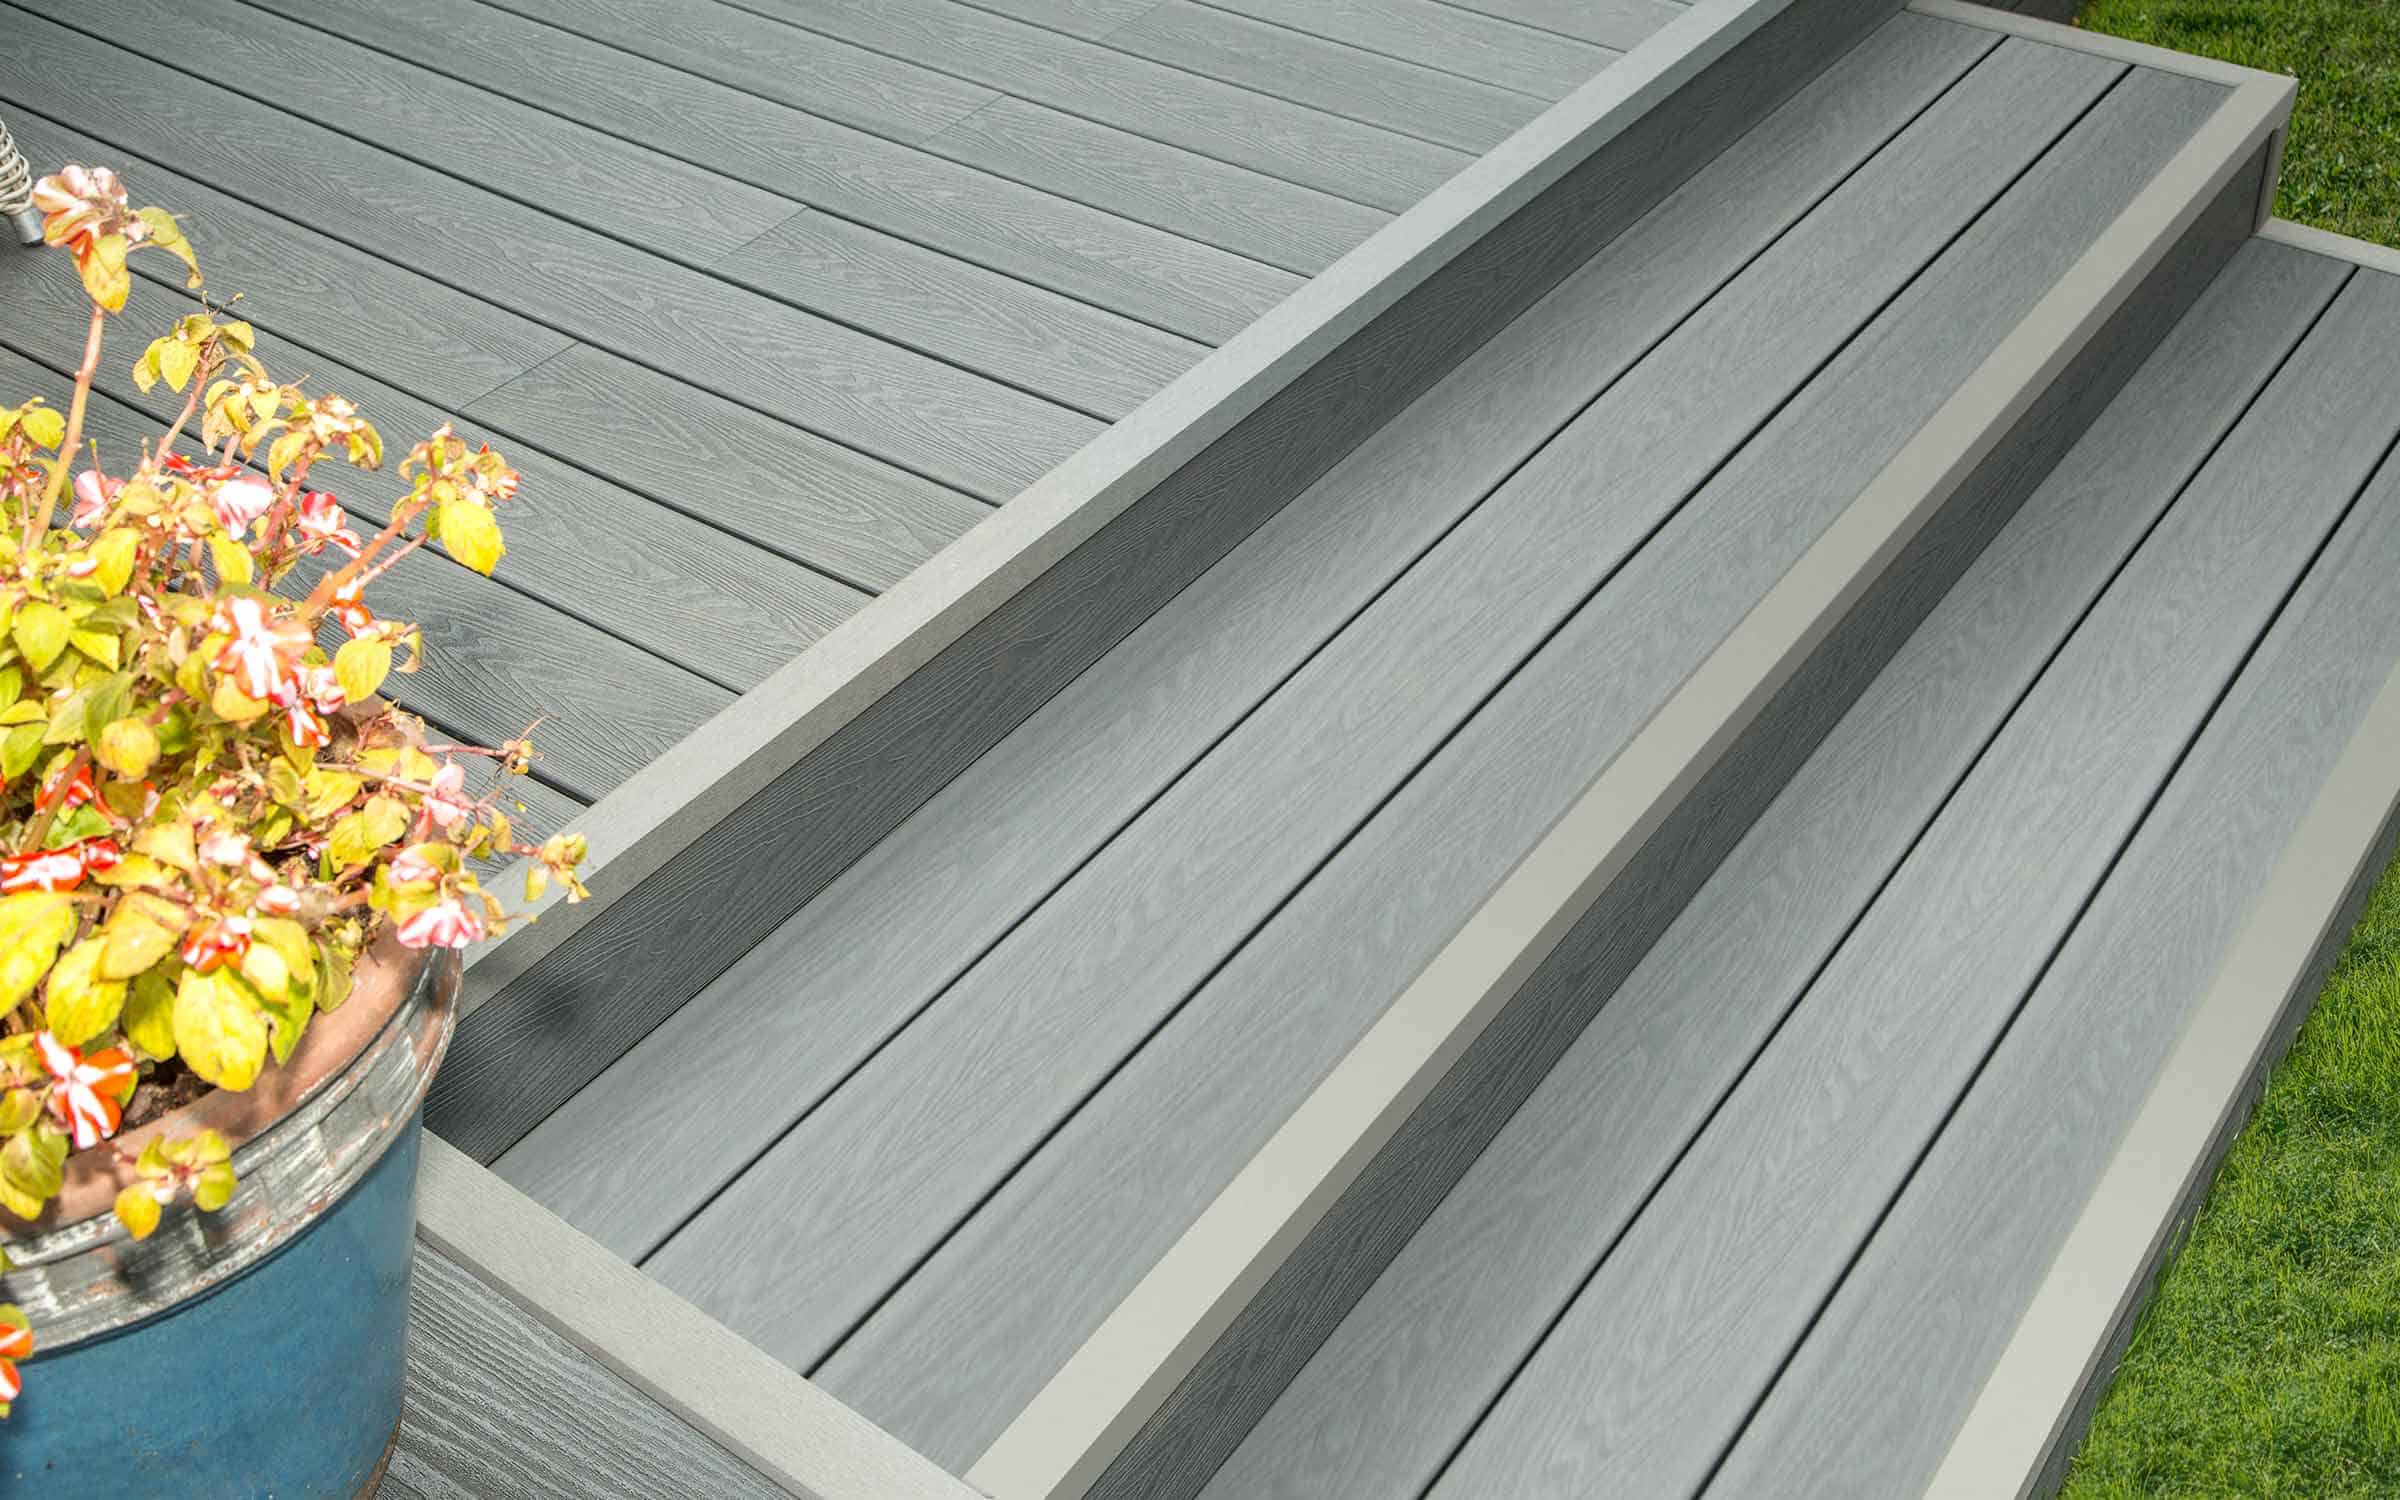 How To Install Composite Decking On Stairs 1704354651 